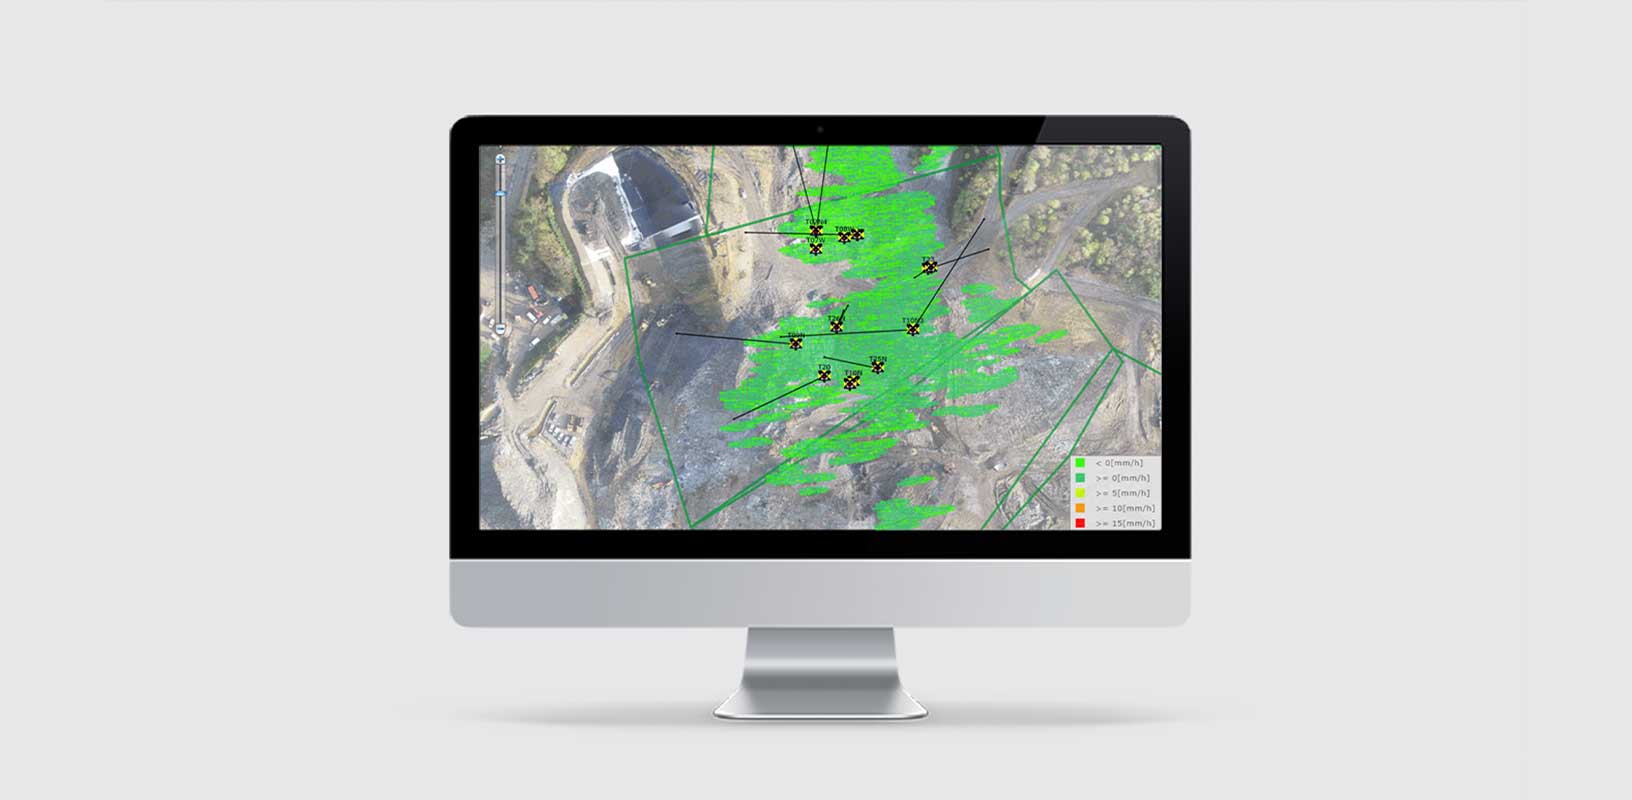 Monitoring data of an aerial view of an environmental scene